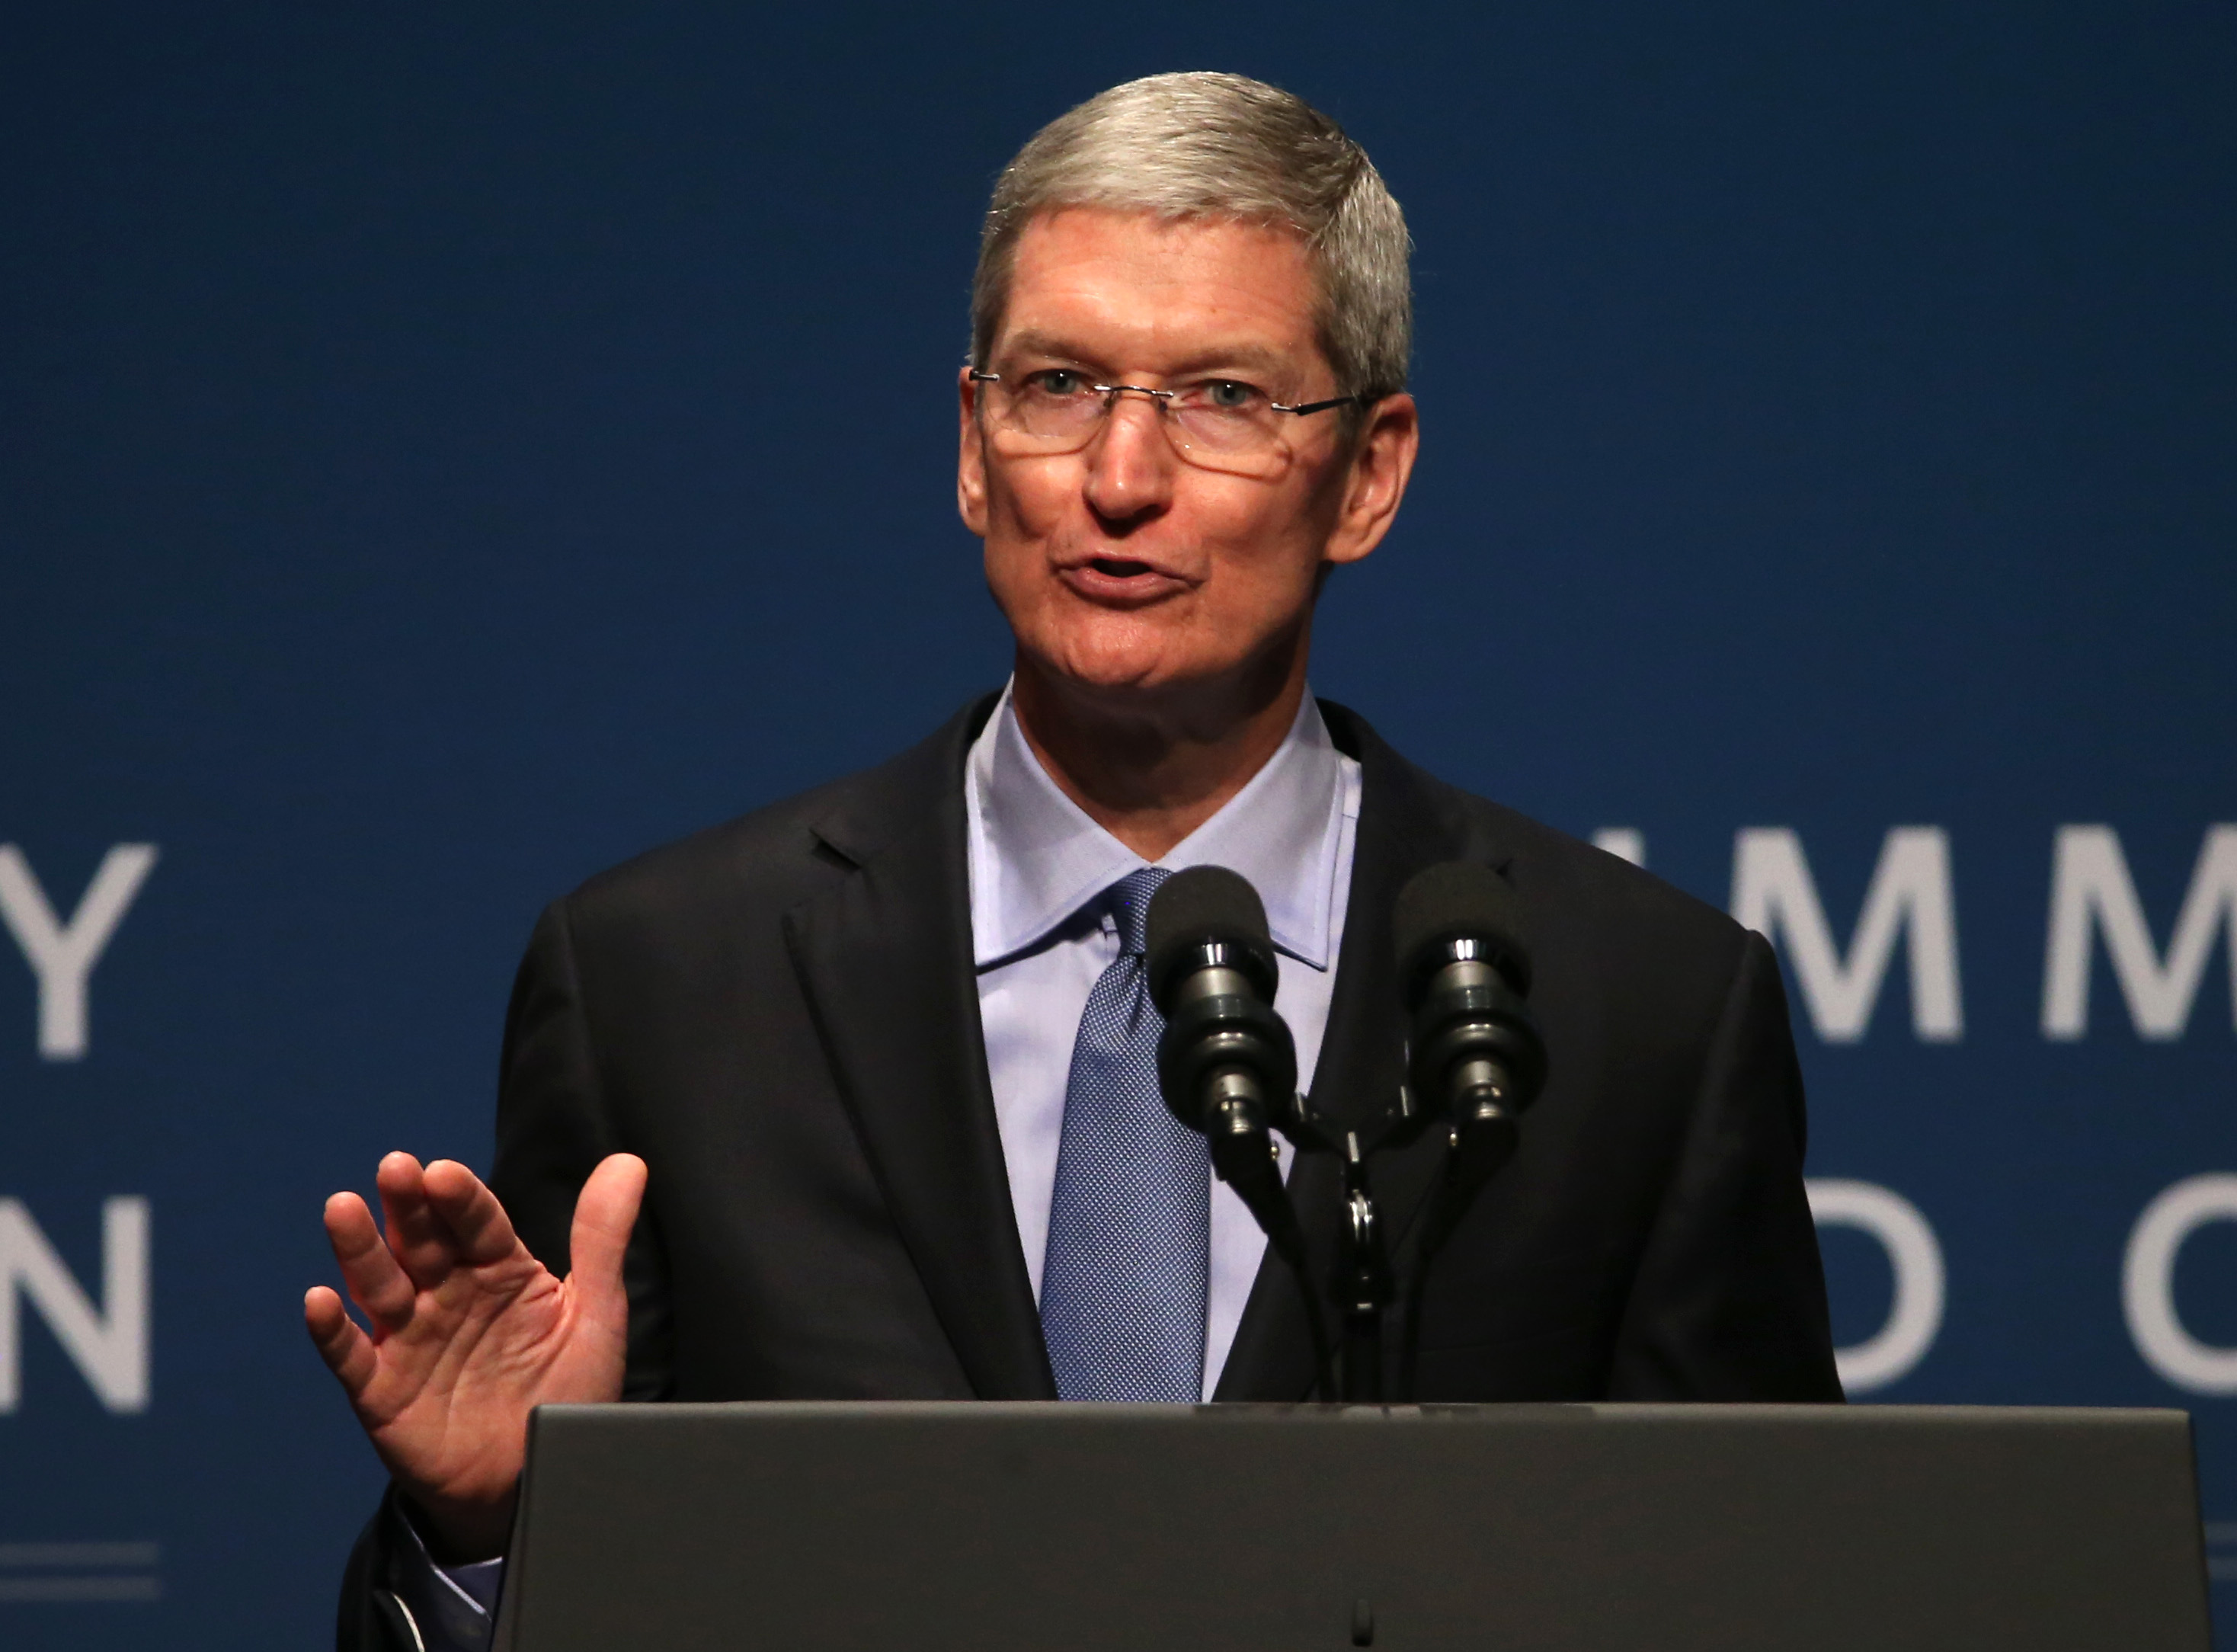 Apple CEO Tim Cook speaks during the White House Summit on Cybersecurity and Consumer Protection on February 13, 2015 in Stanford, California. (Justin Sullivan&mdash;Getty Images)